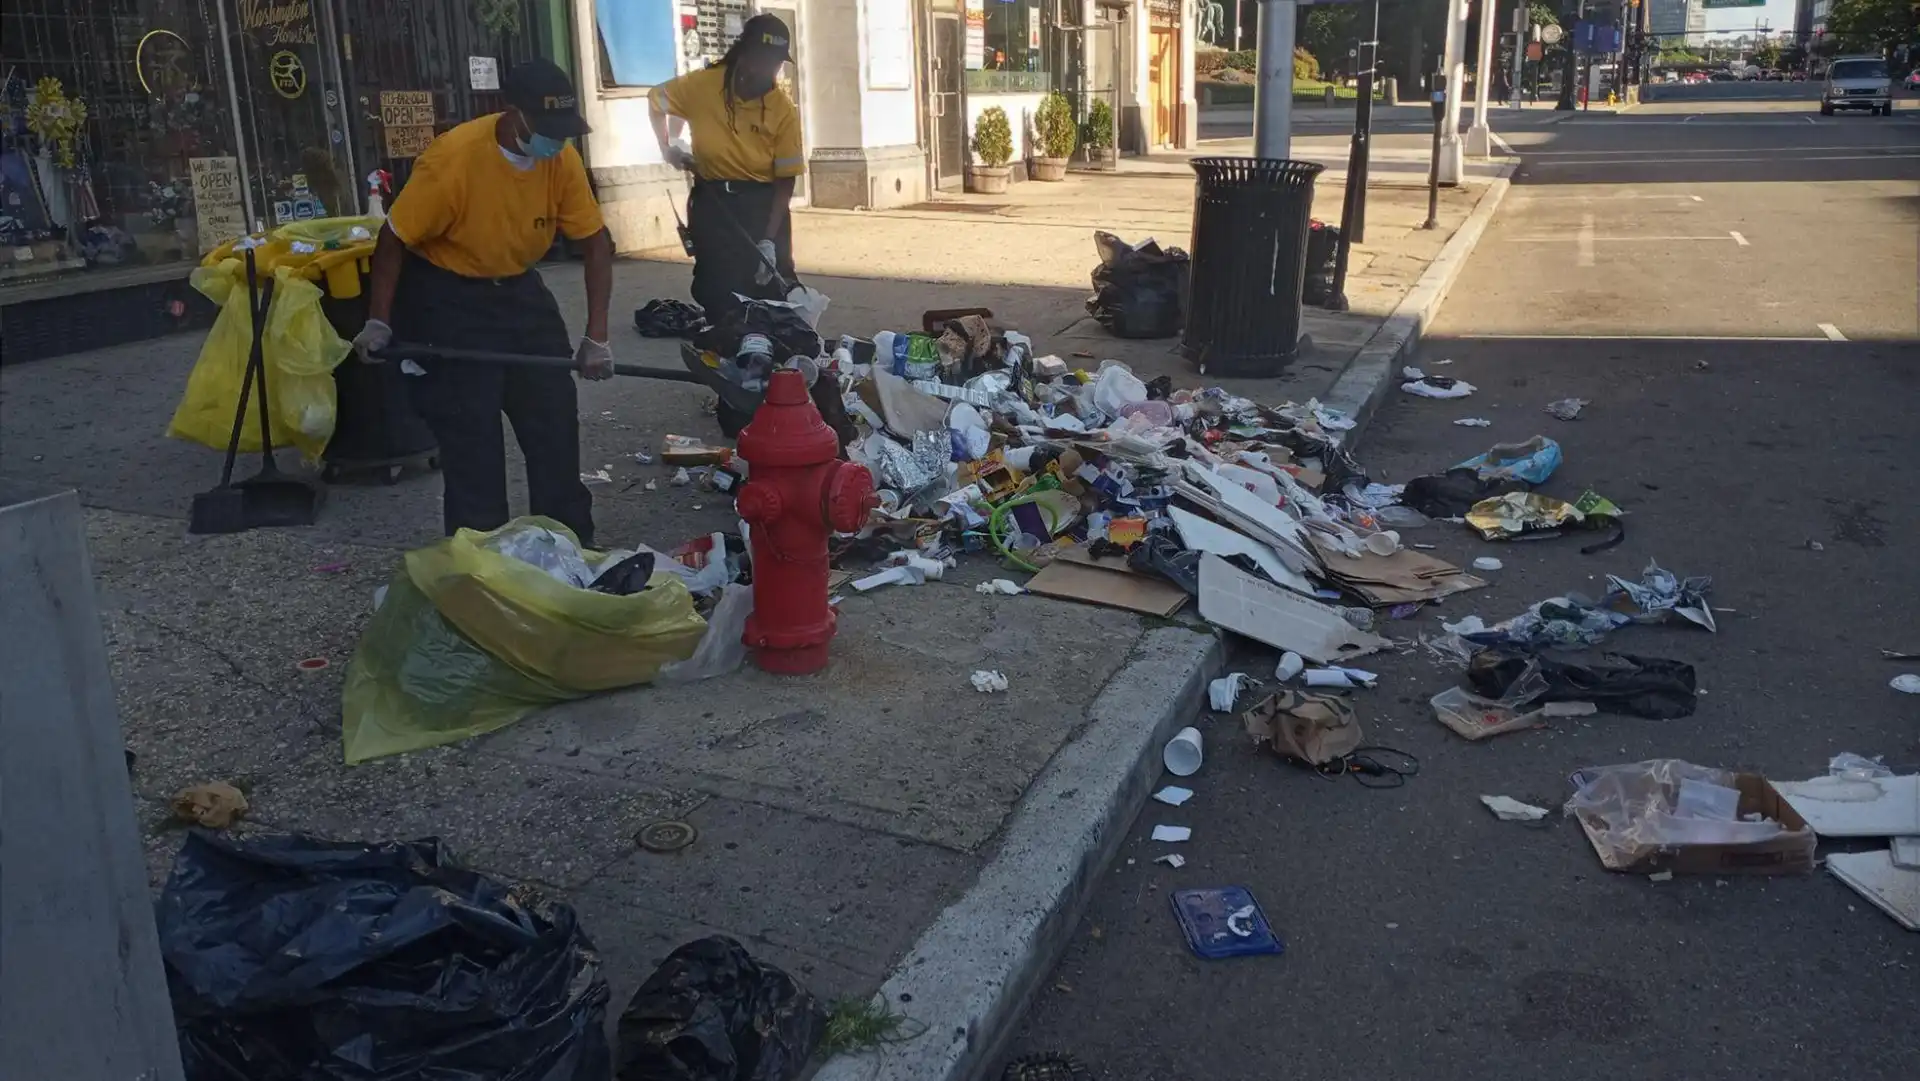 A before image of garbage on the street